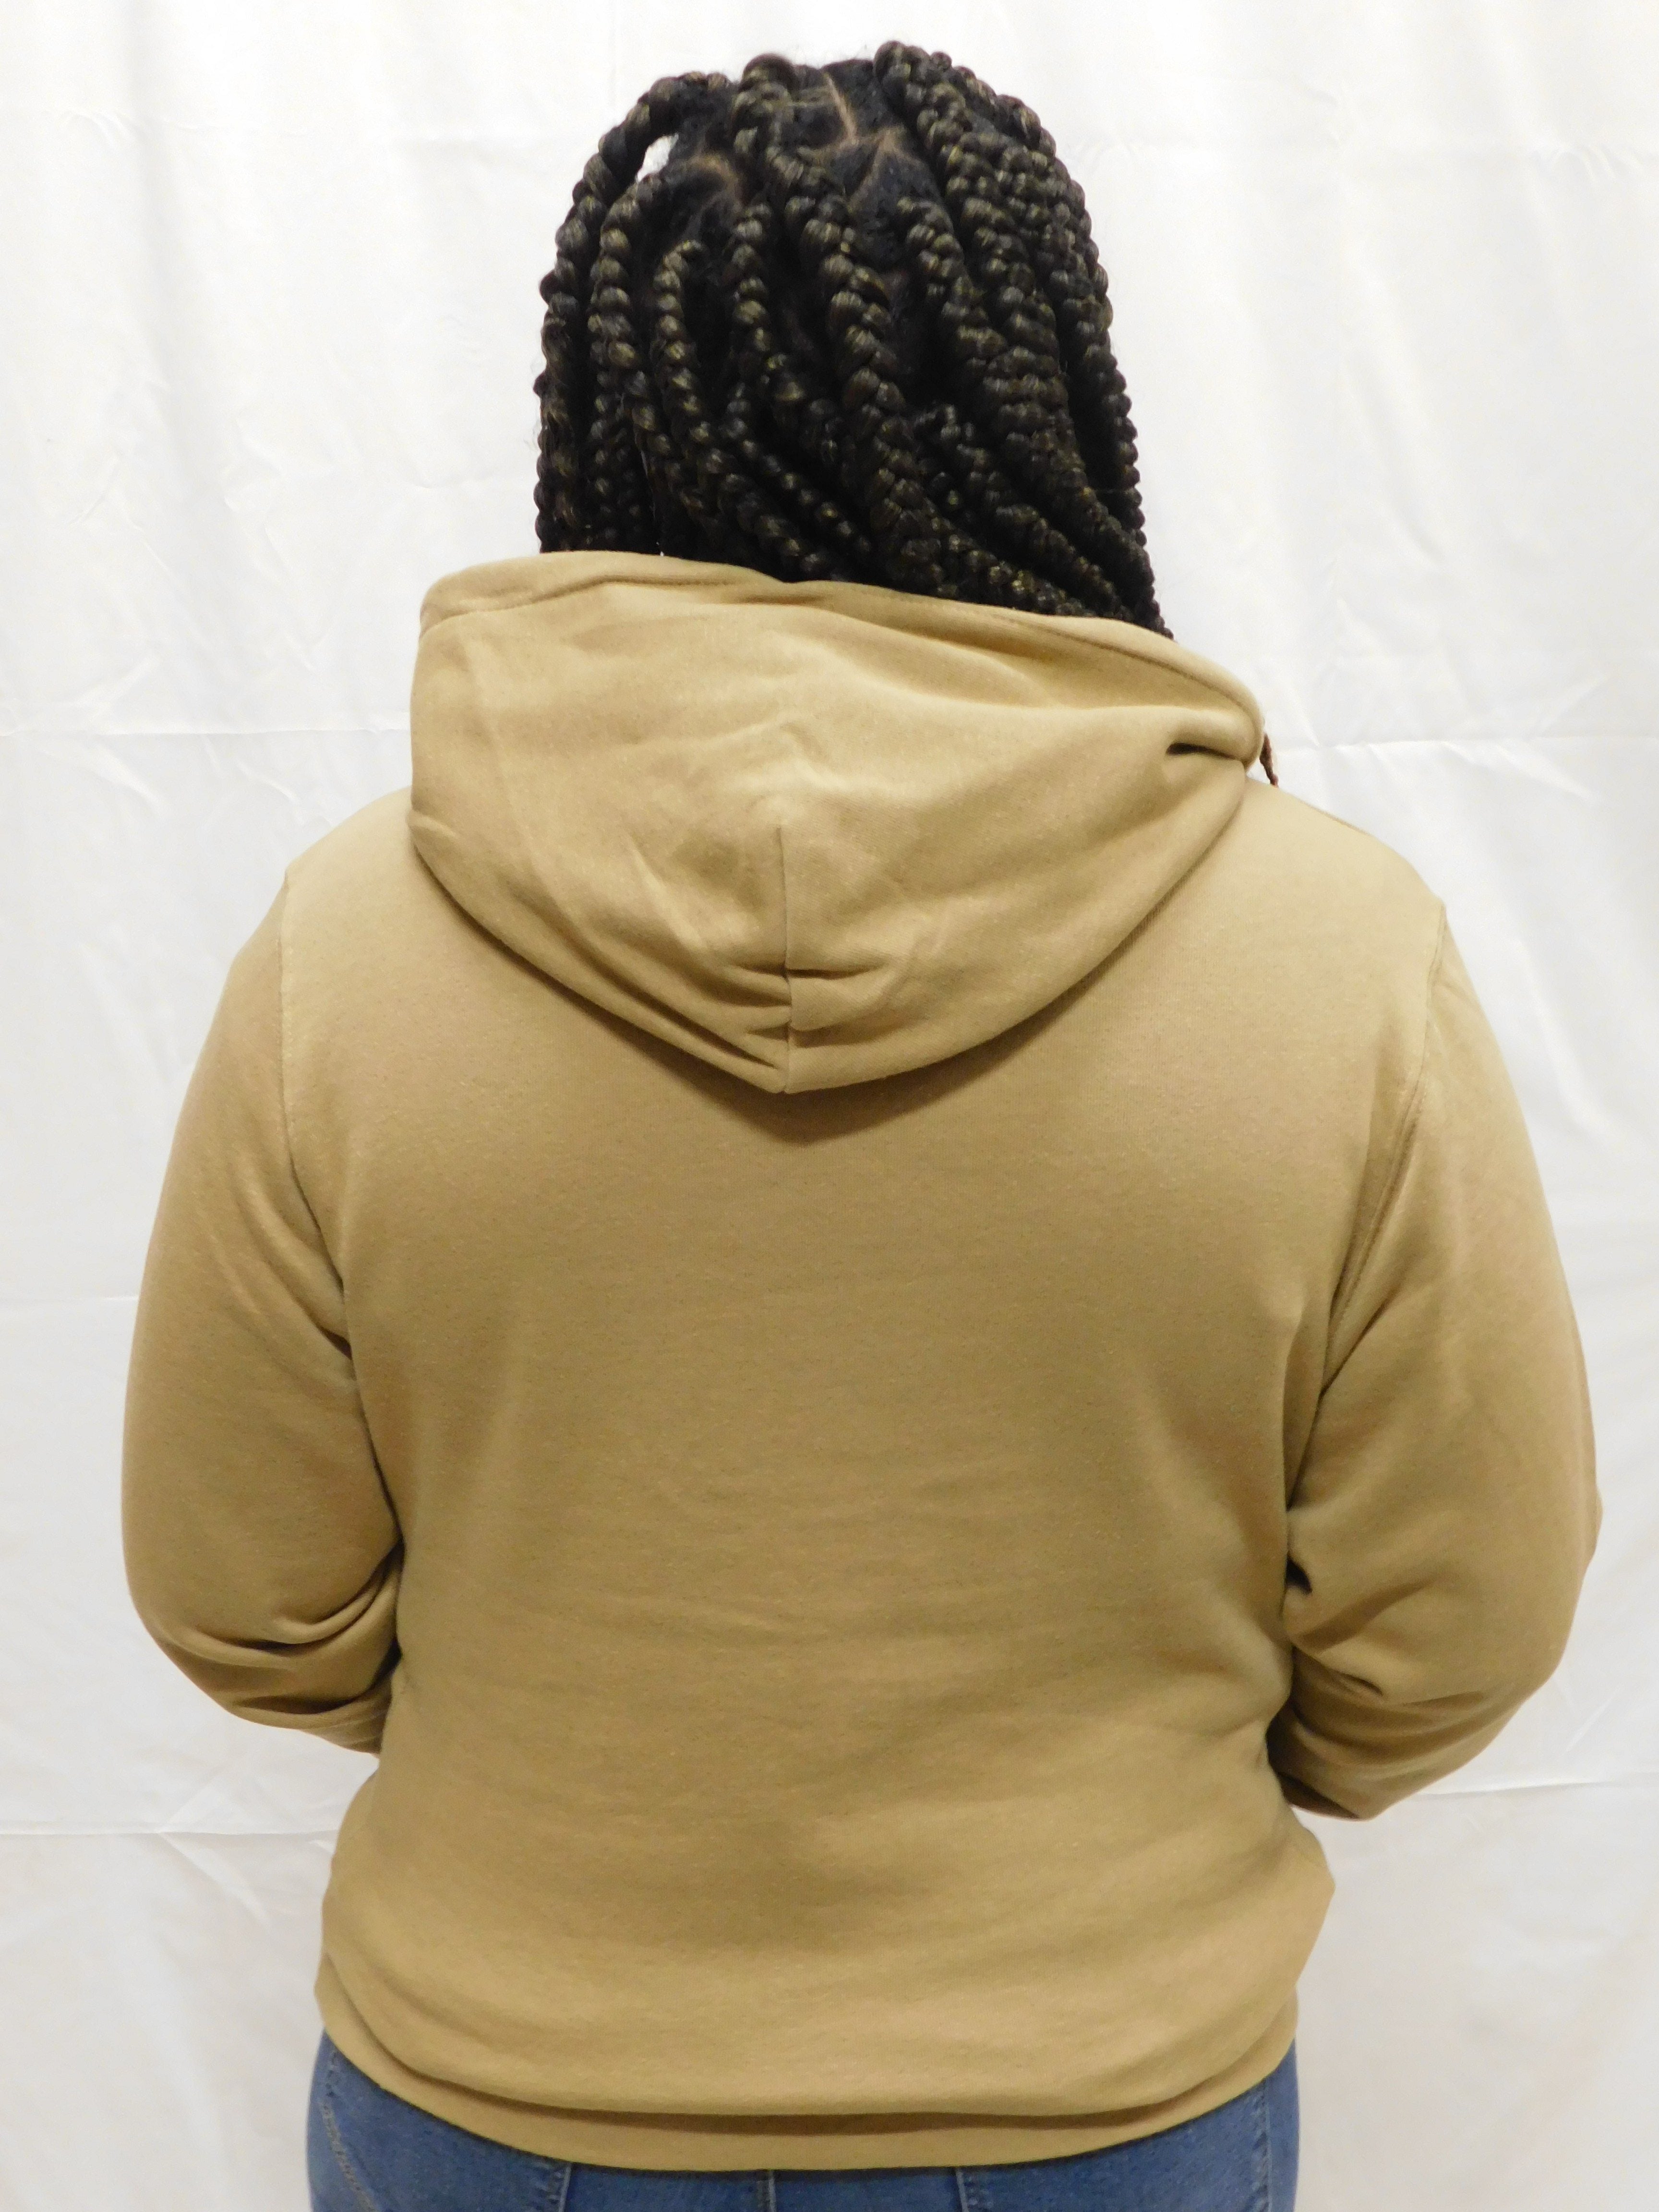 Stand Tall in Tan Hoodie